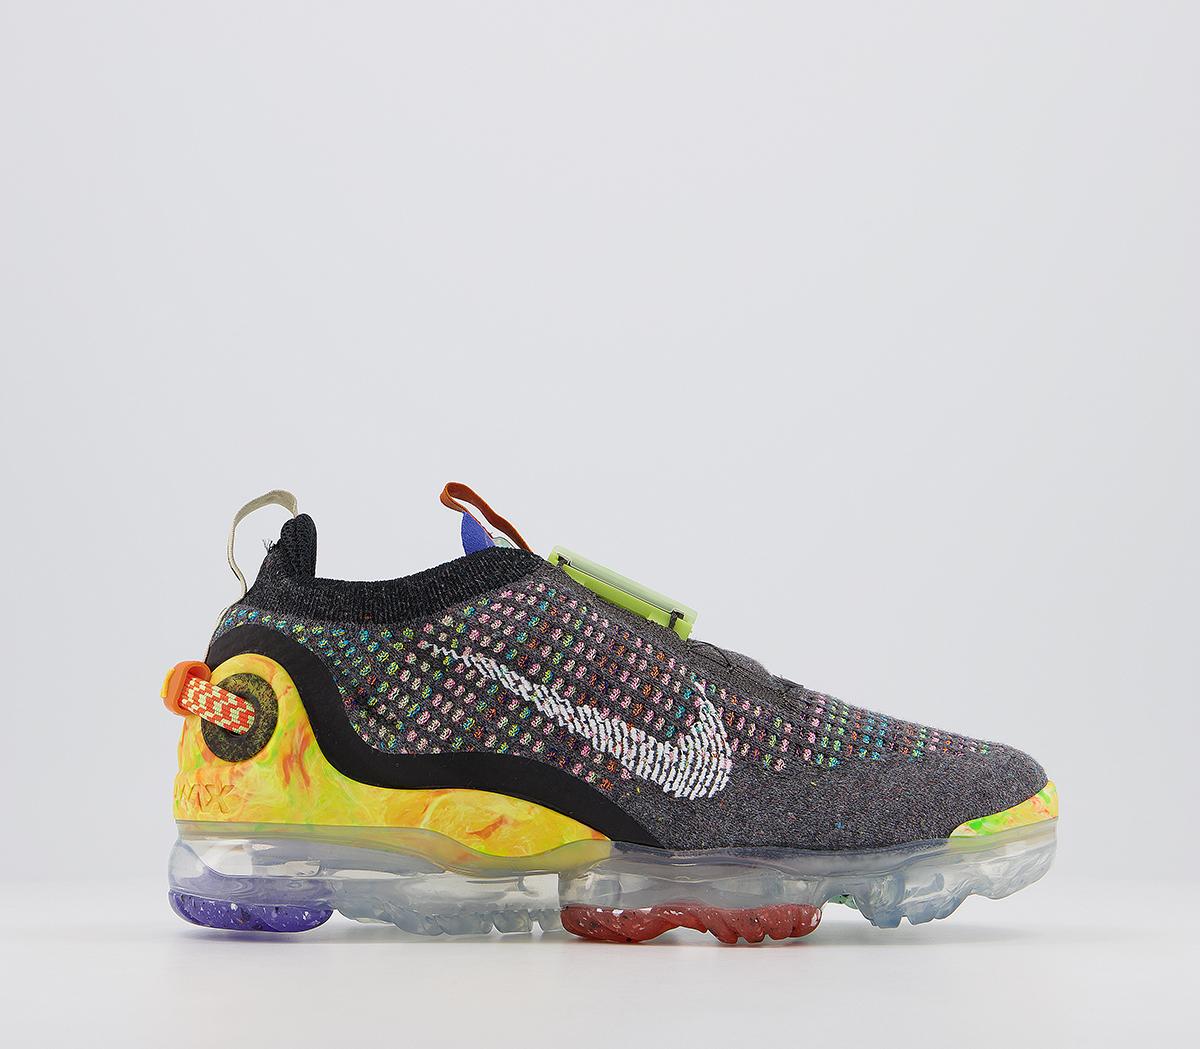 vapormax 2020 trainers